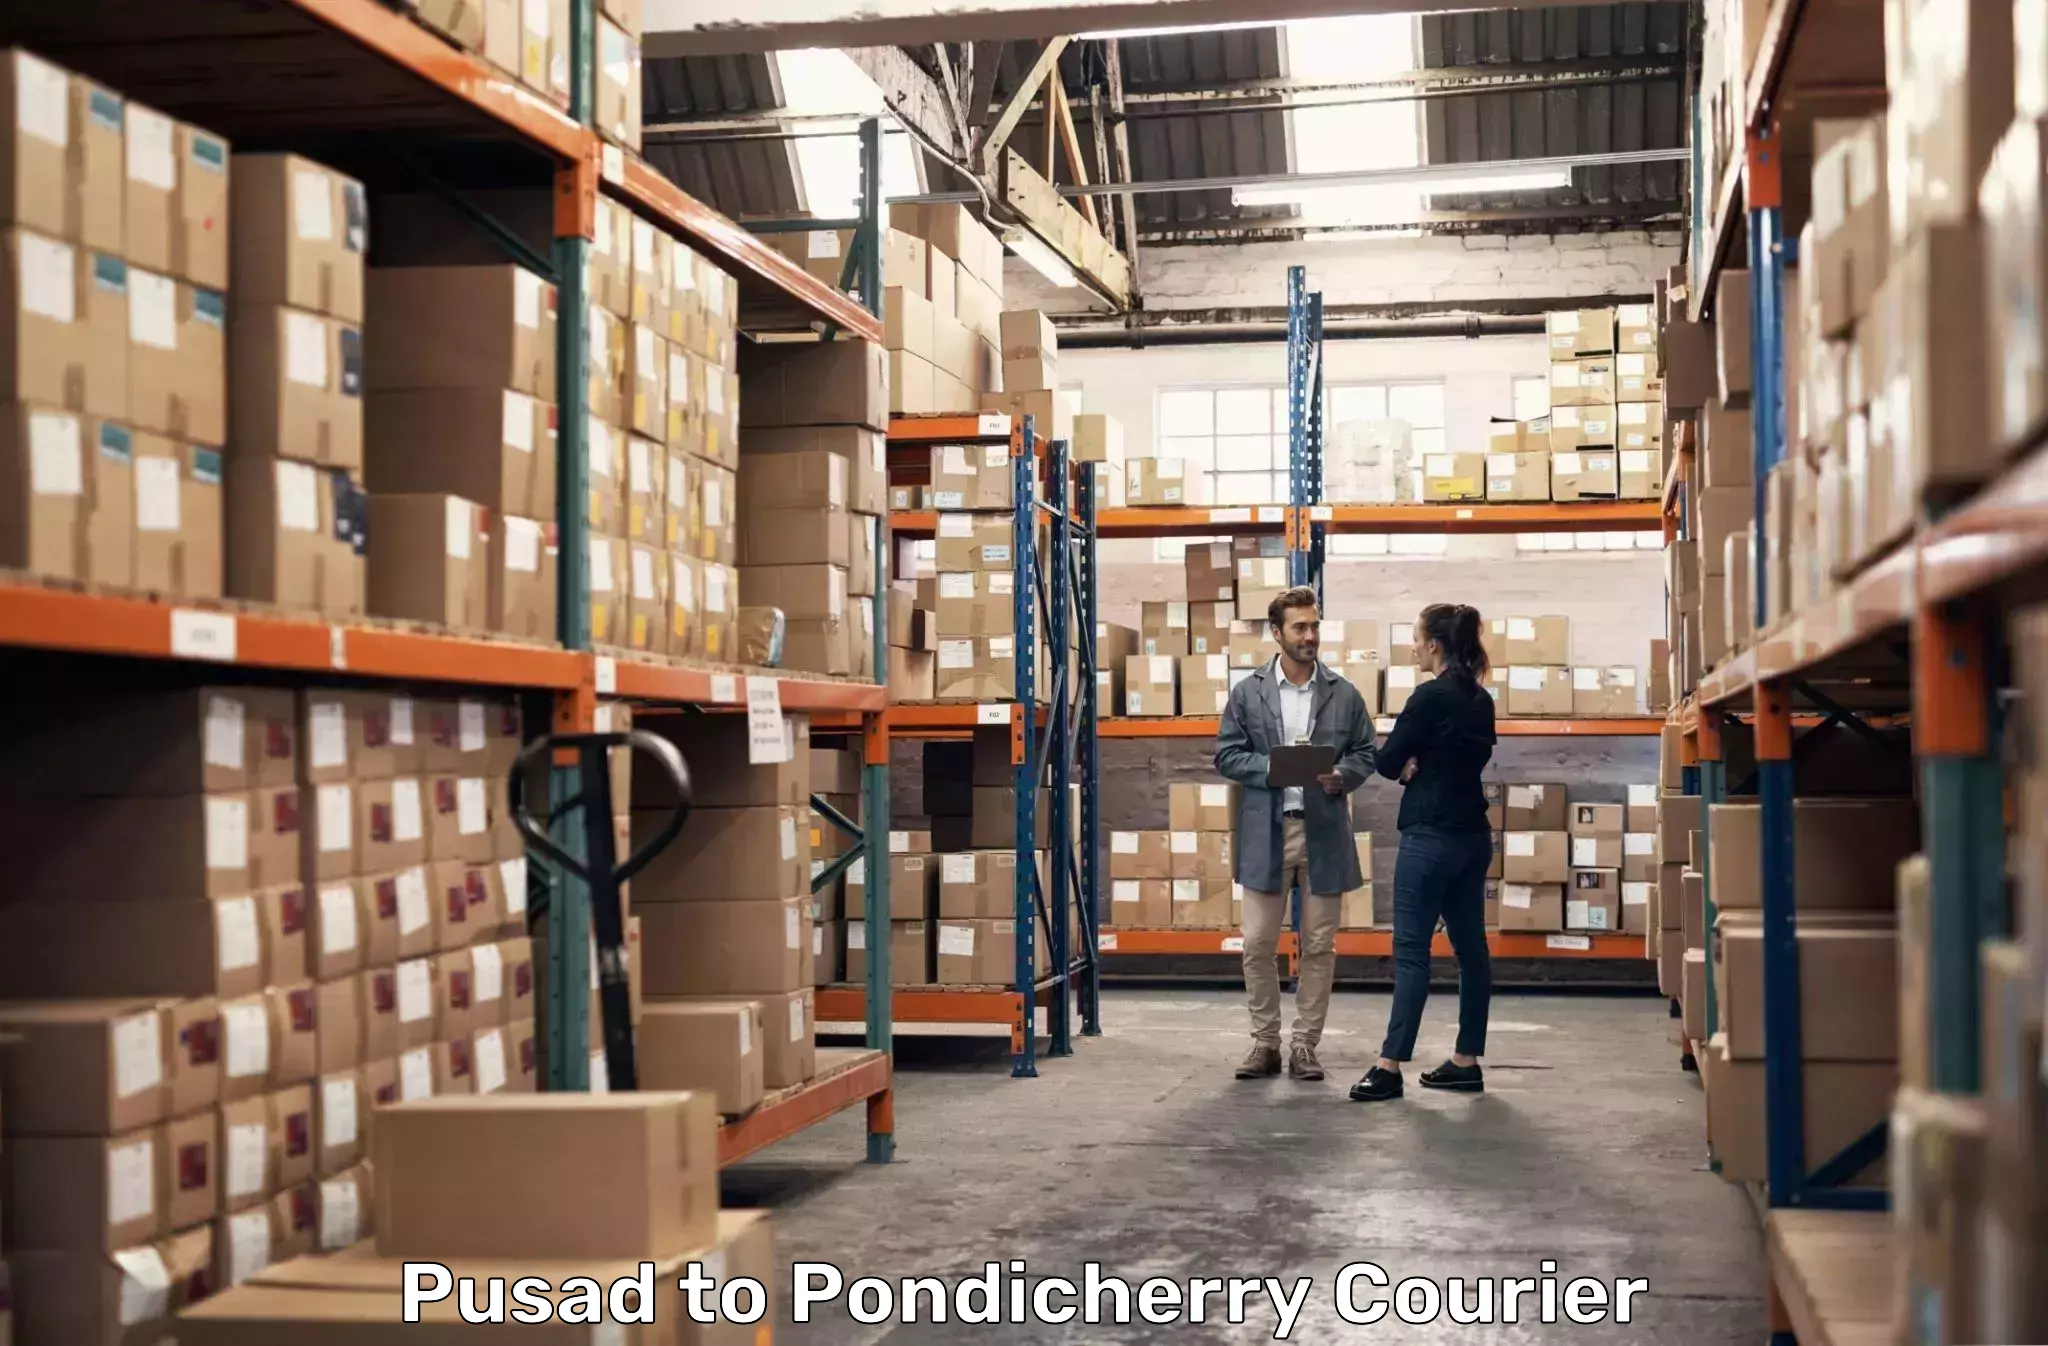 On-call courier service Pusad to Pondicherry University